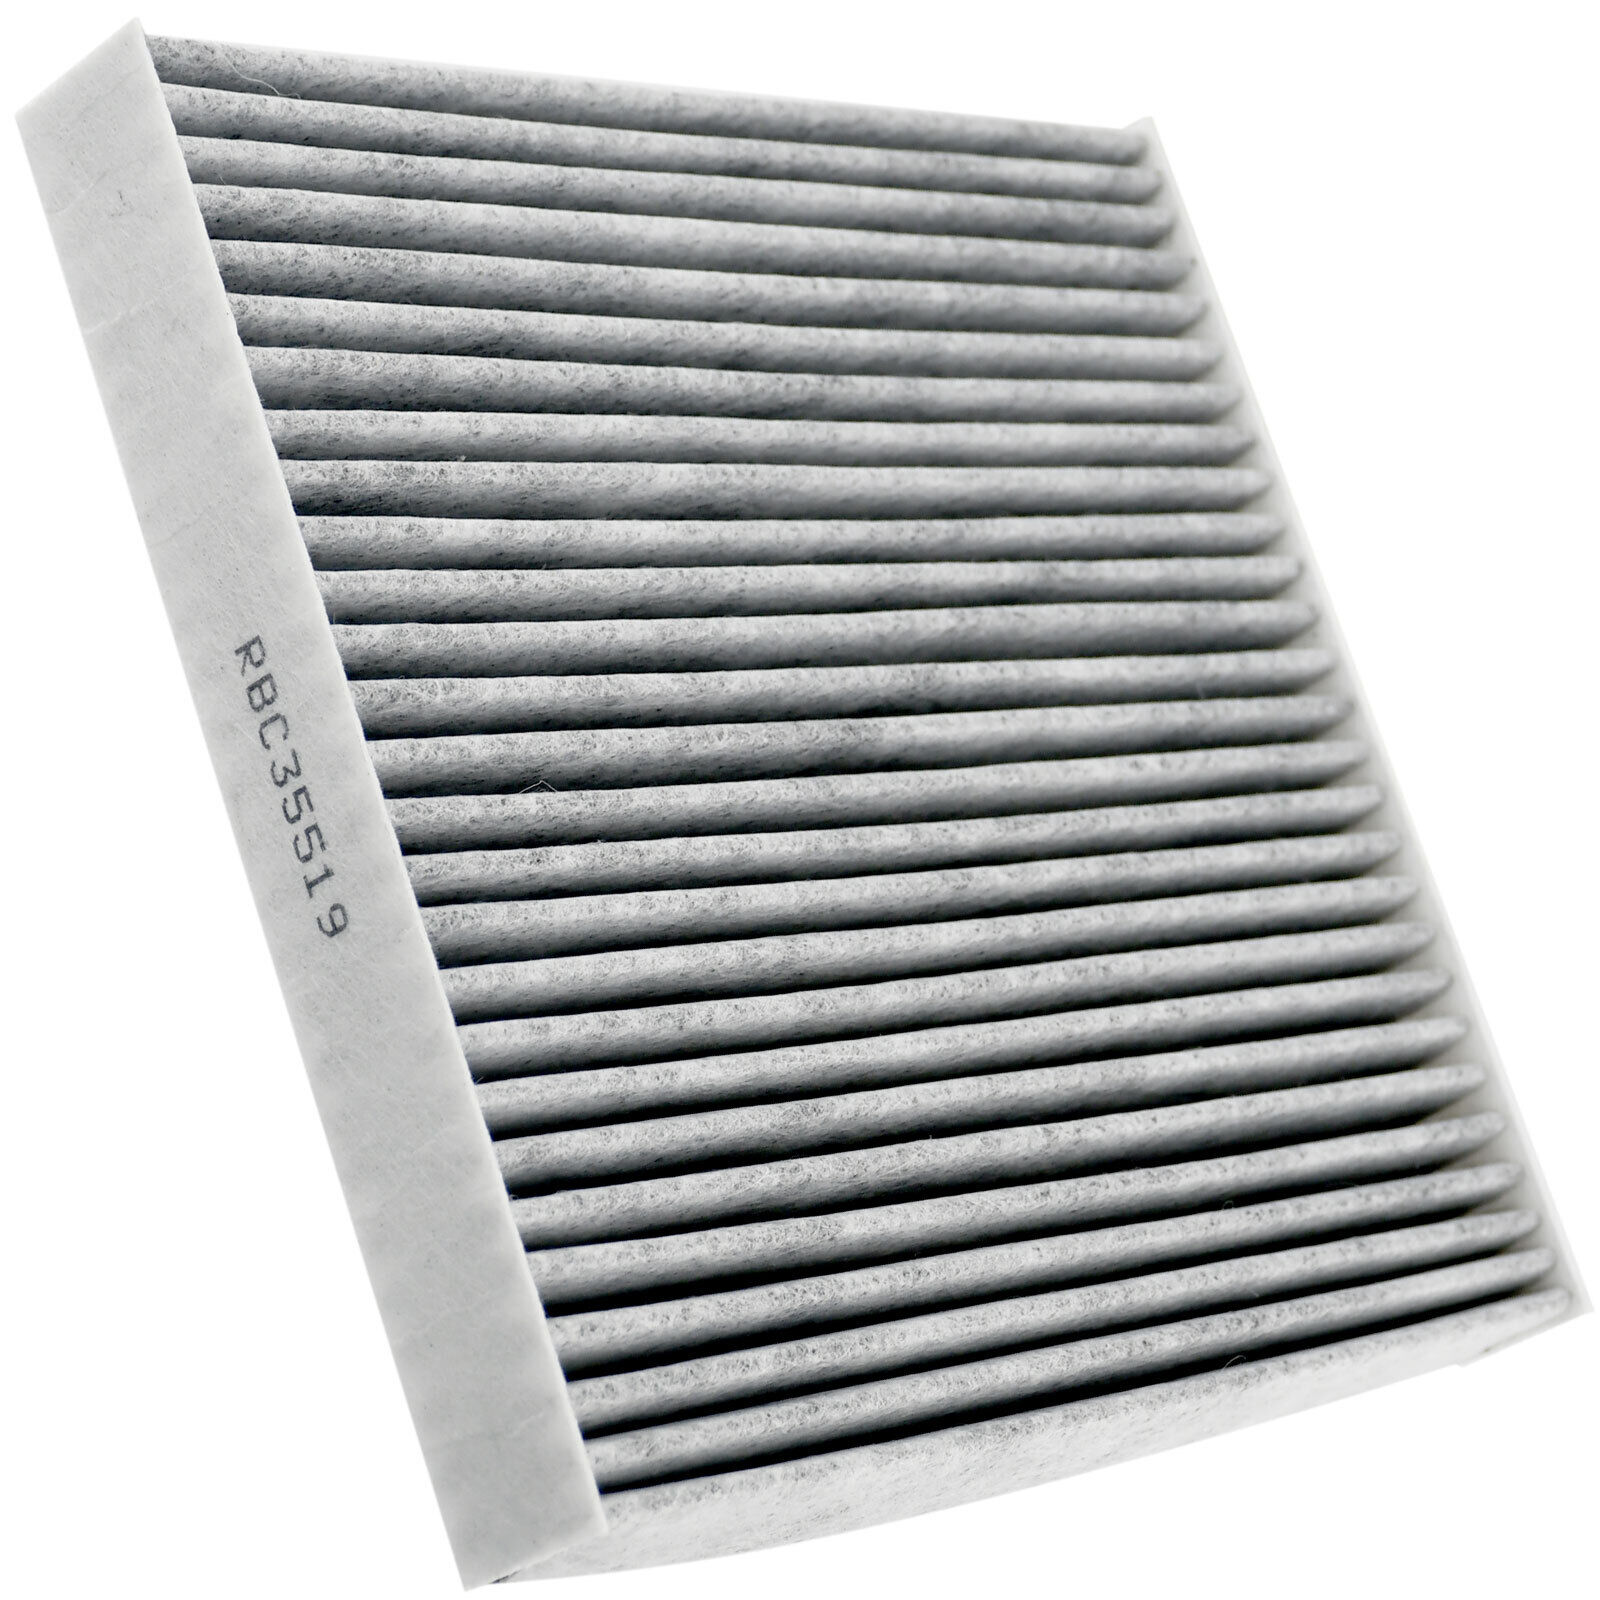 1X Carbon Cabin Air Filter For Honda Accord CRV Odyssey Civic Acura MDX RDX TLX